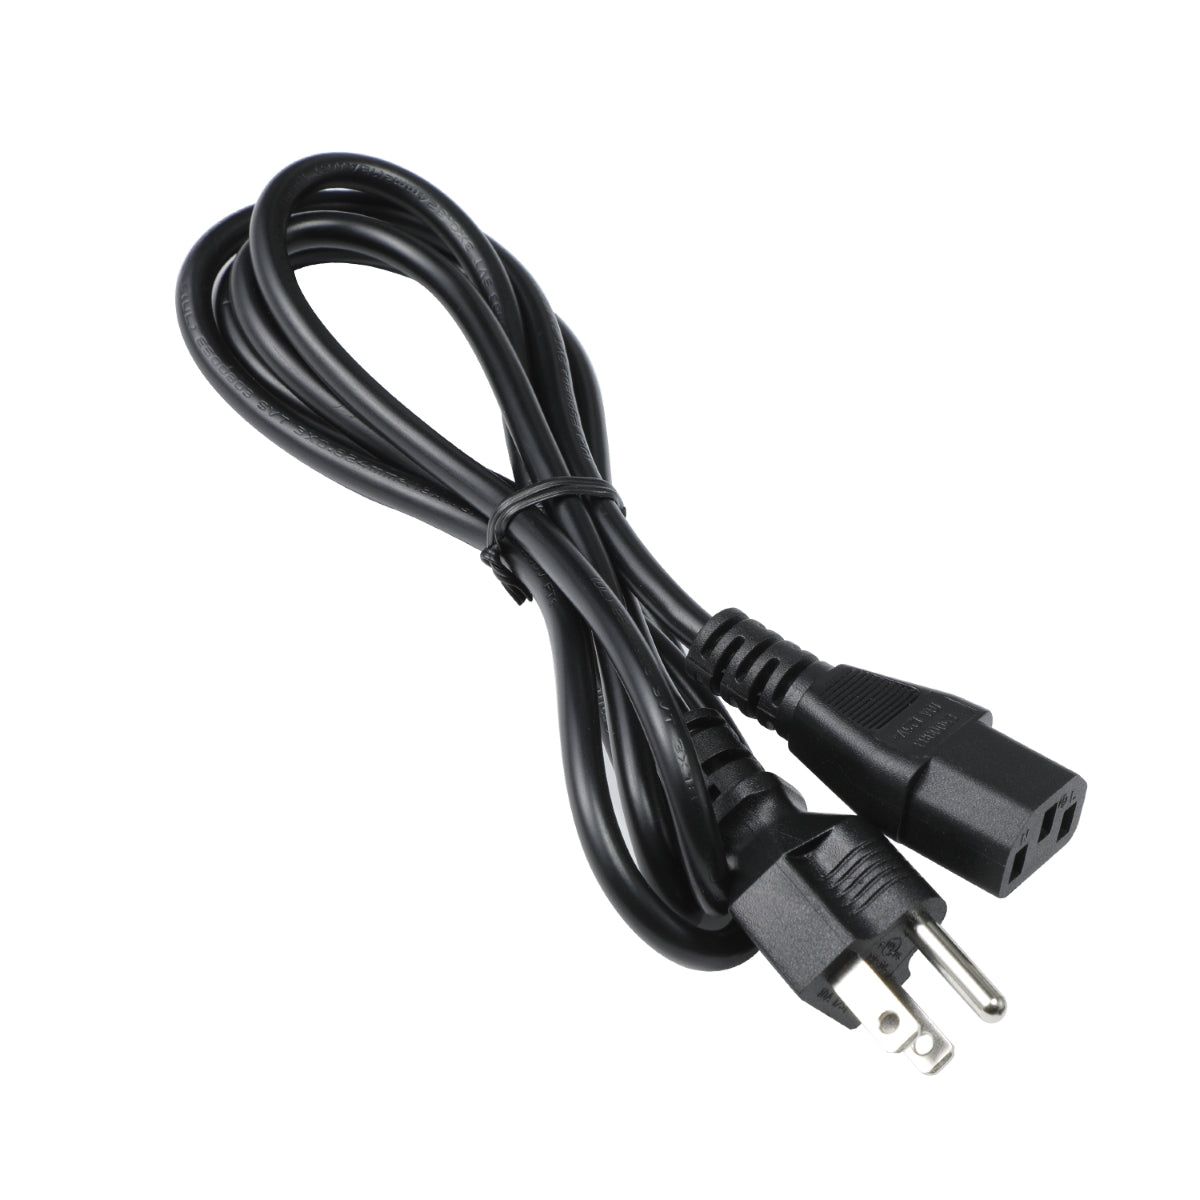 Power Cord for Samsung LS27A800UJNXGO Monitor TV.